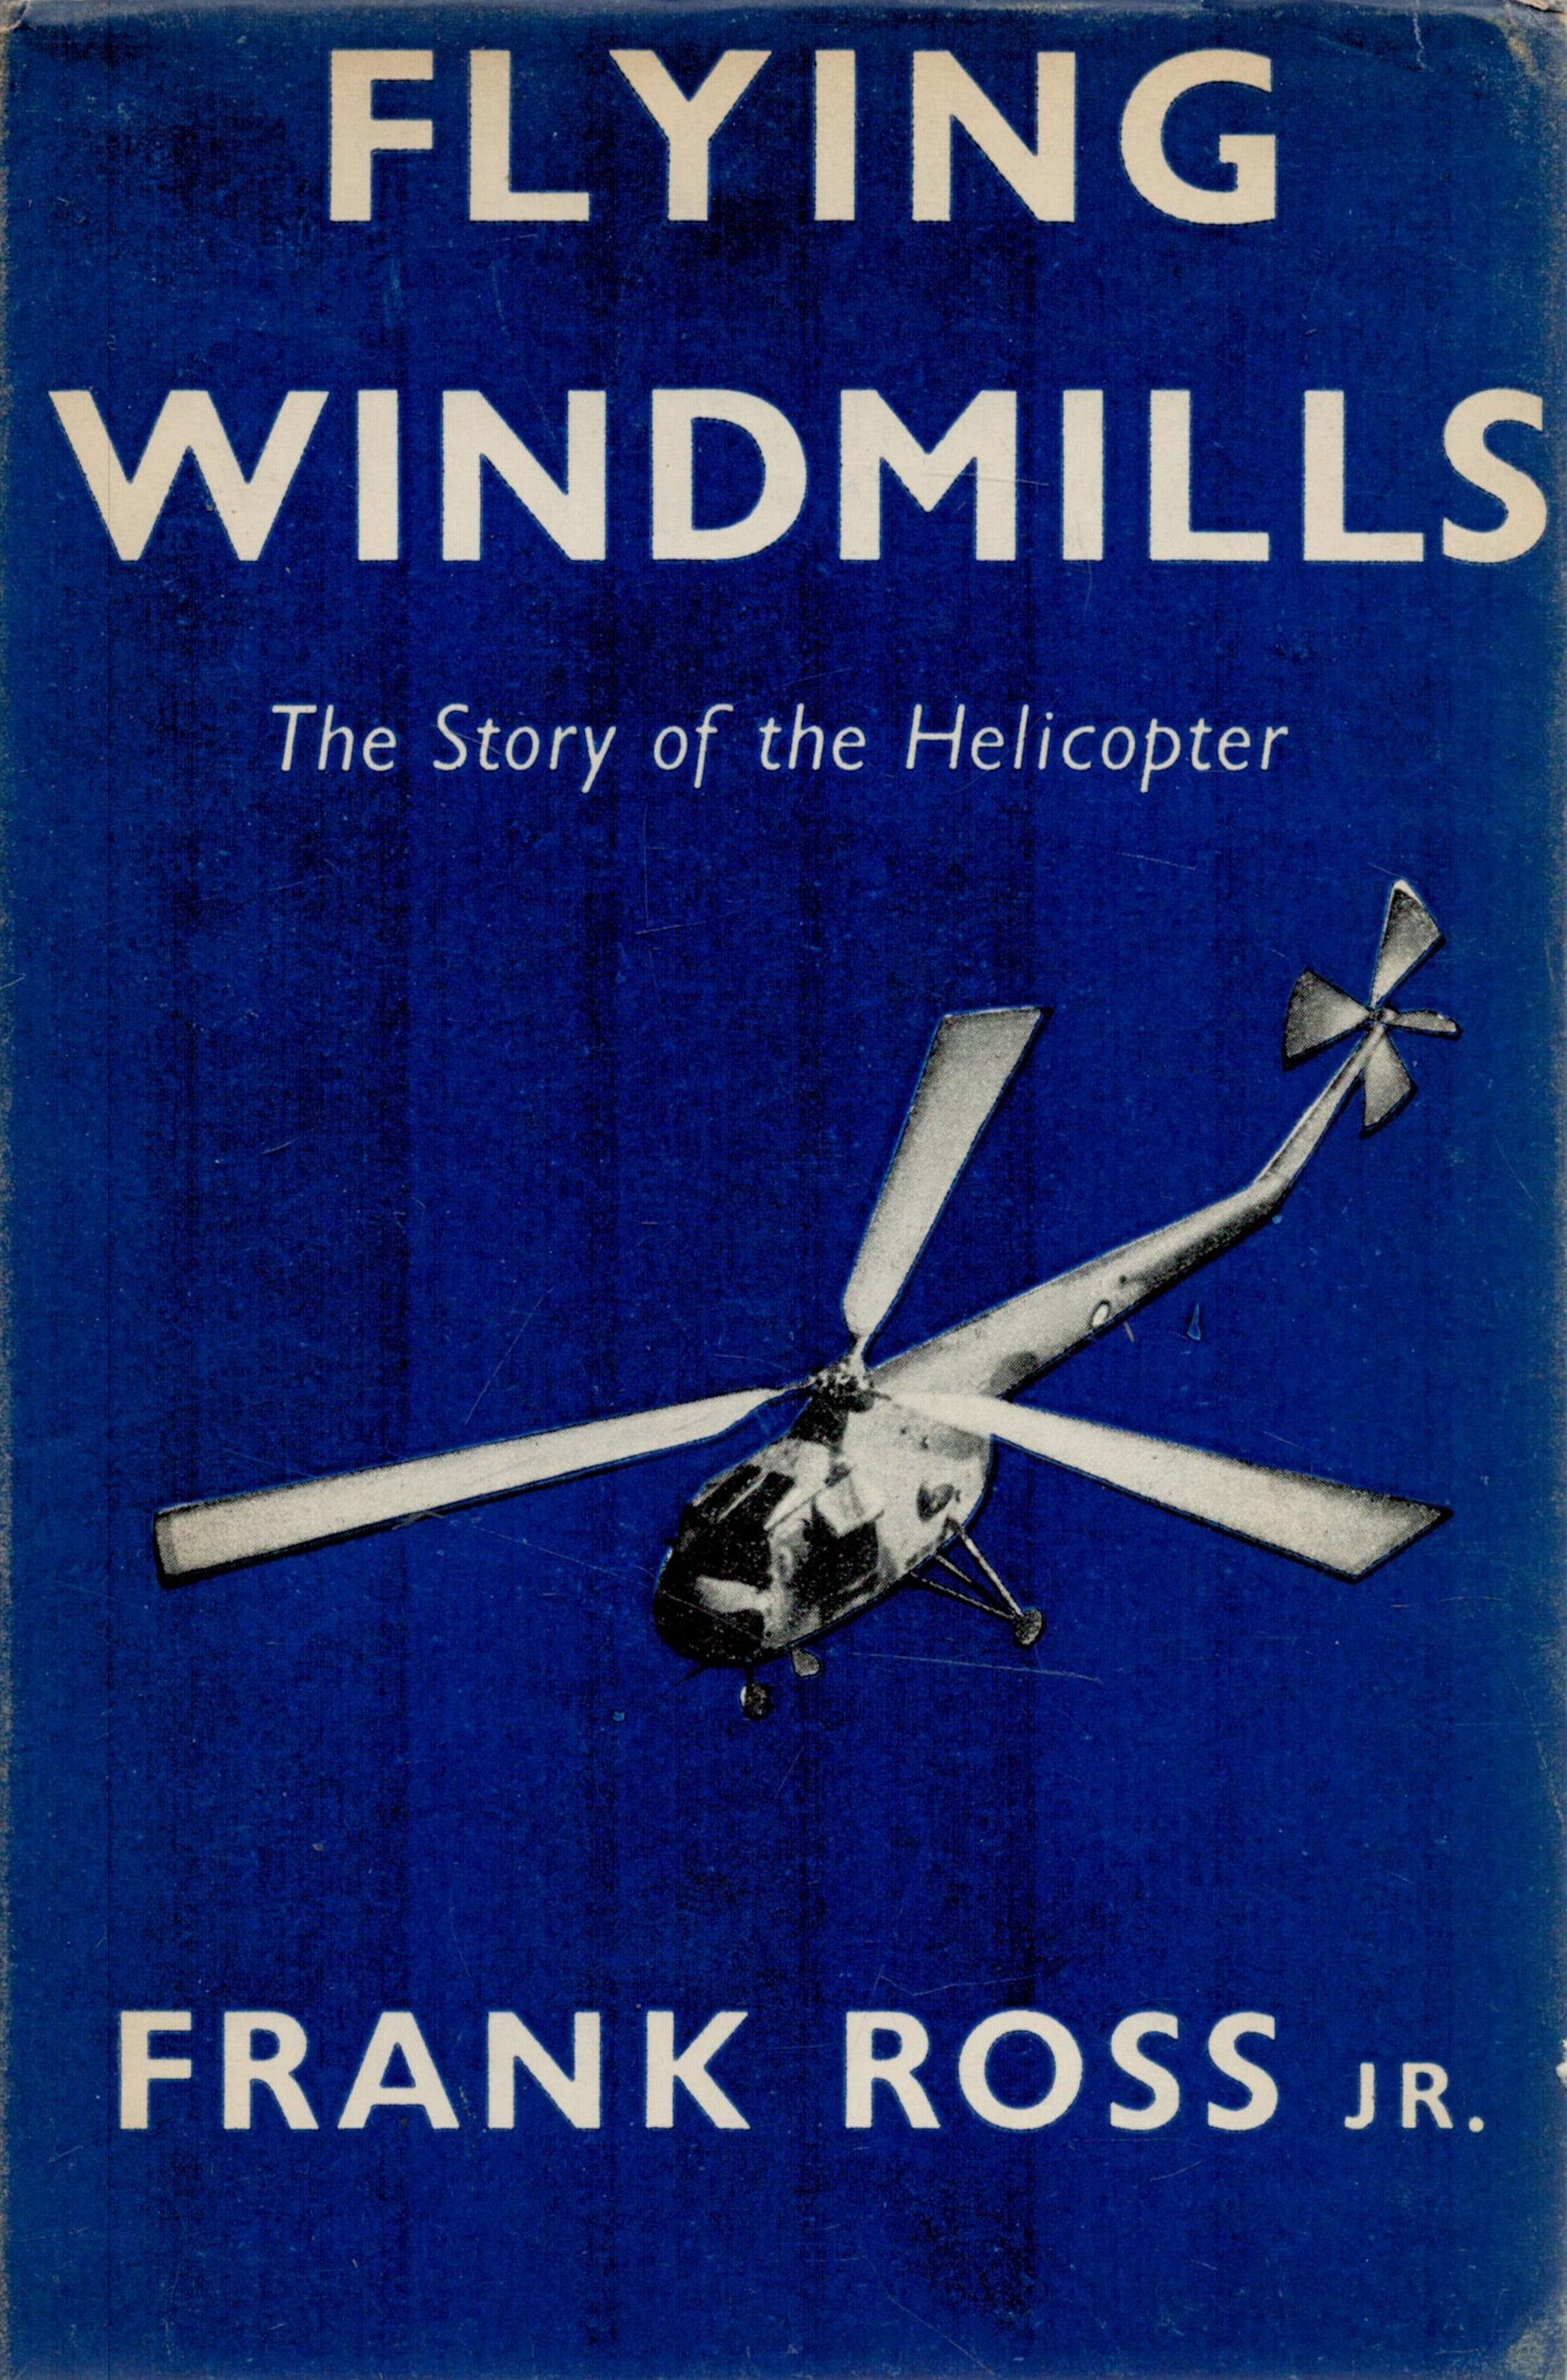 Flying Windmills - The Story of the Helicopter. By Frank Ross Jr. Published by Museum Press, London.